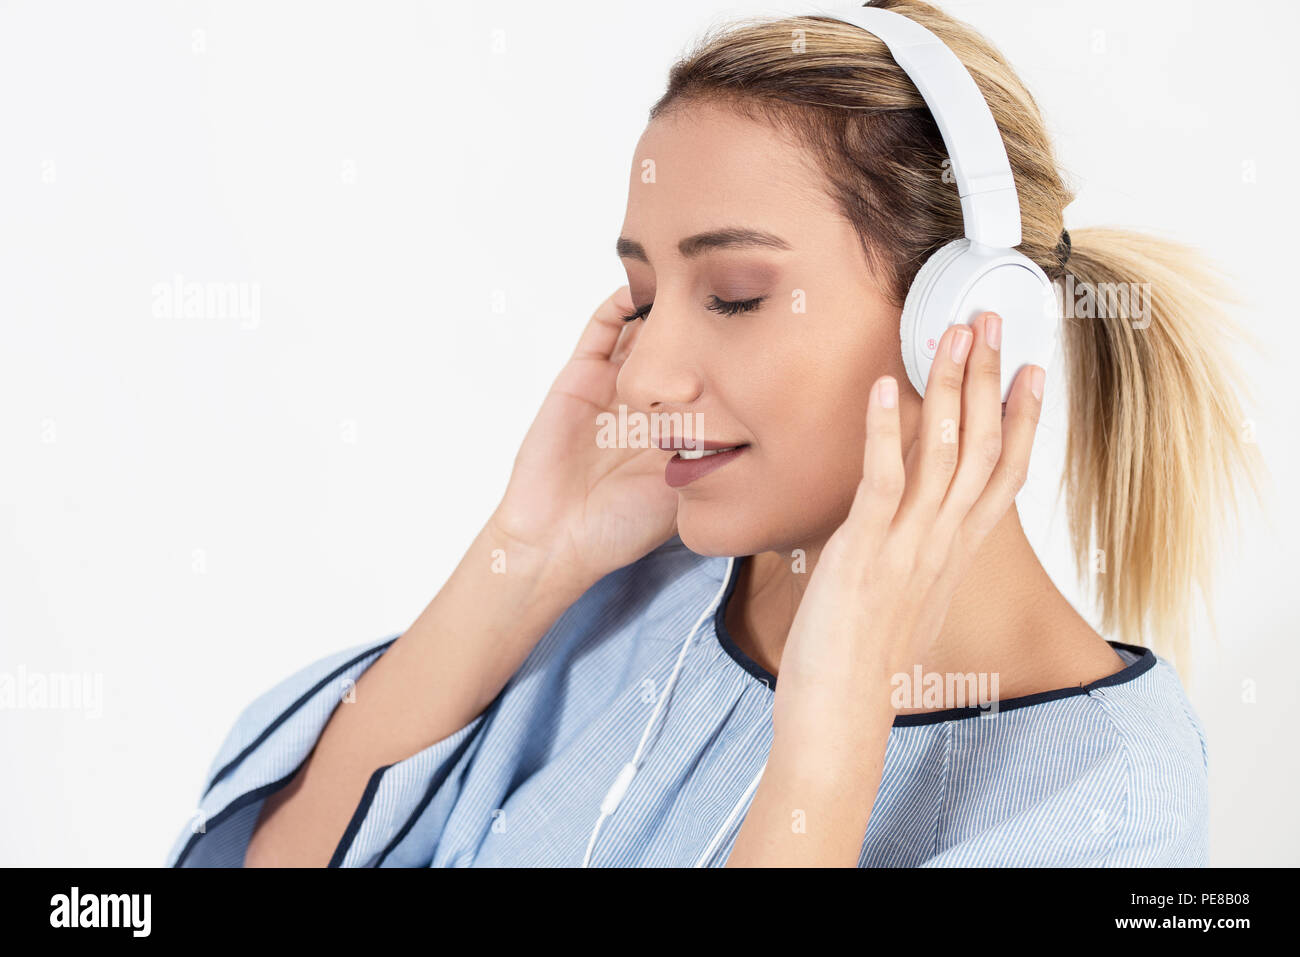 Pretty girl listening music with her headphones on white background Stock Photo